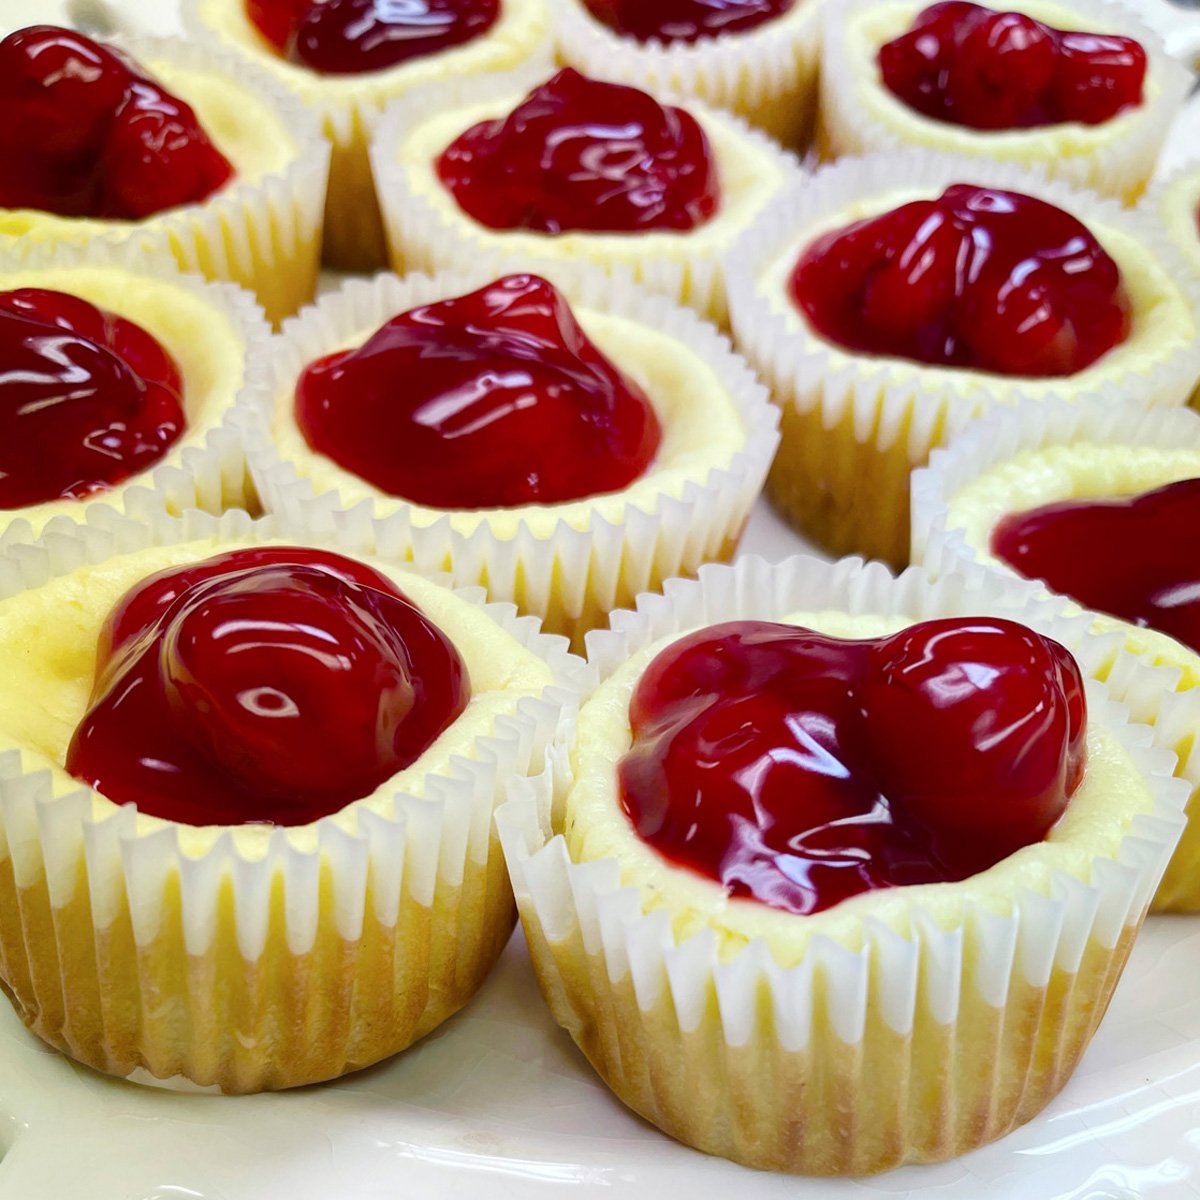 Mini cheesecakes with cherry pie filling.